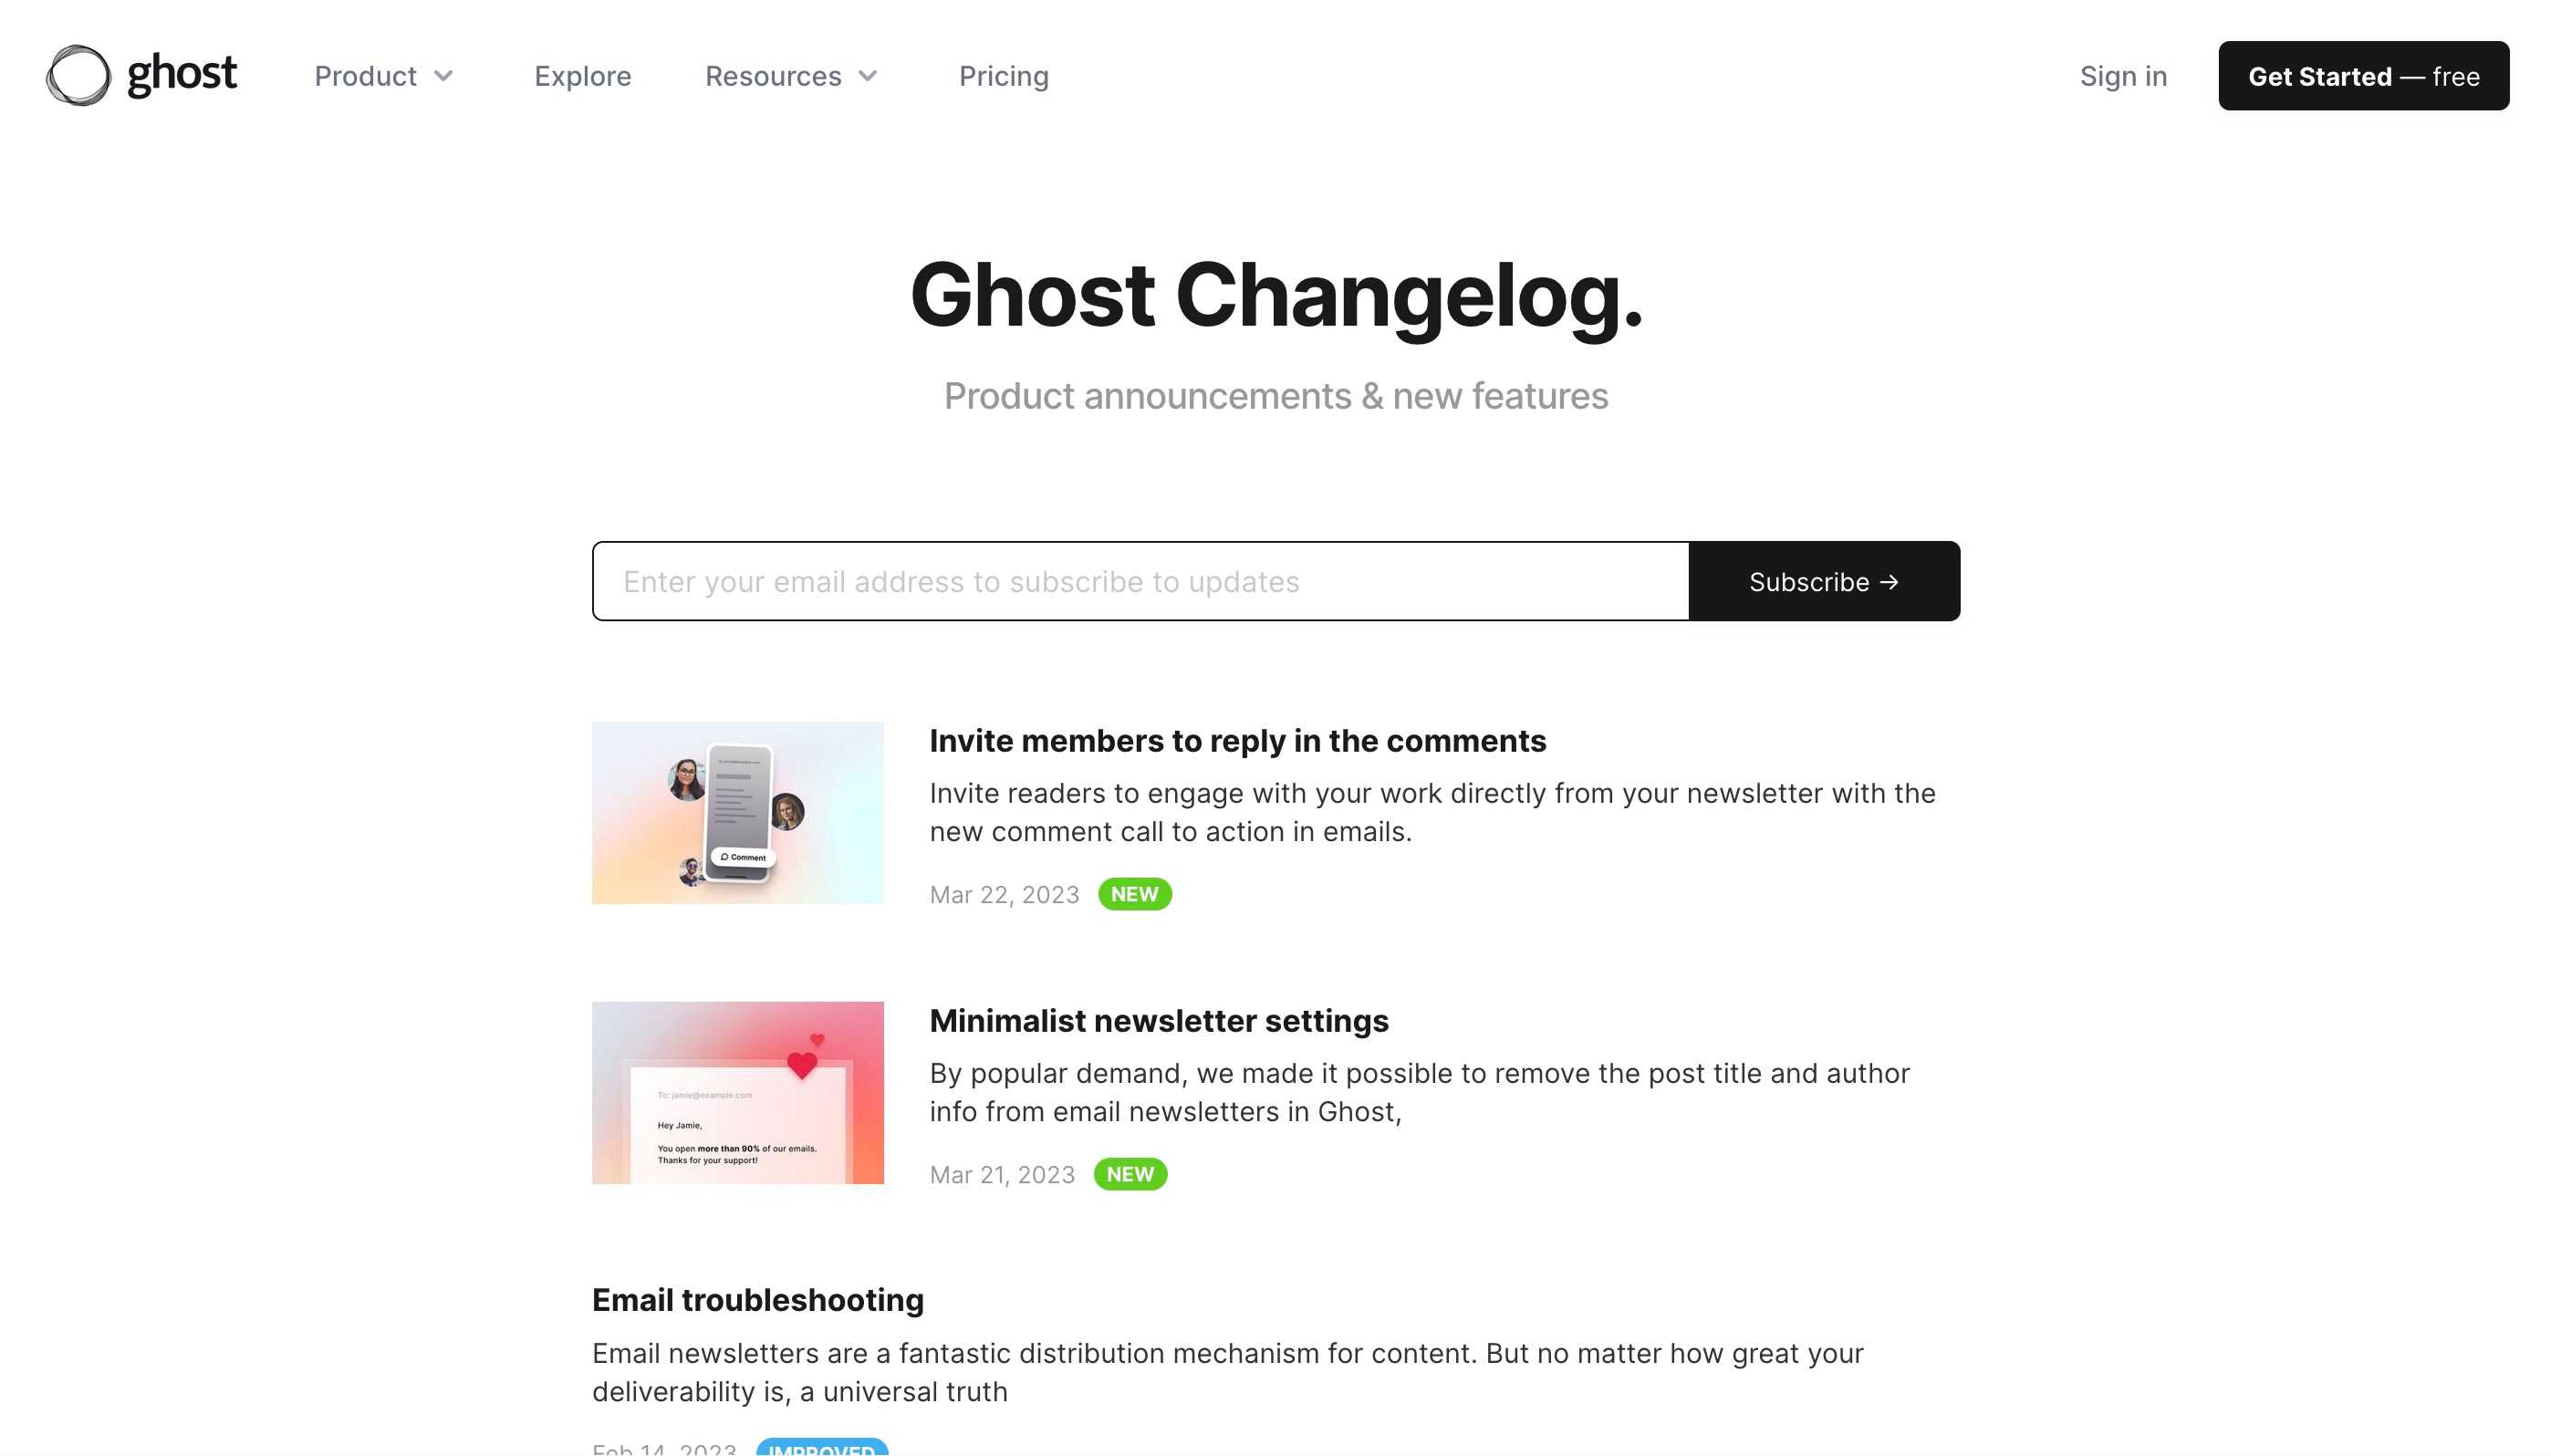 The changelog from Ghost